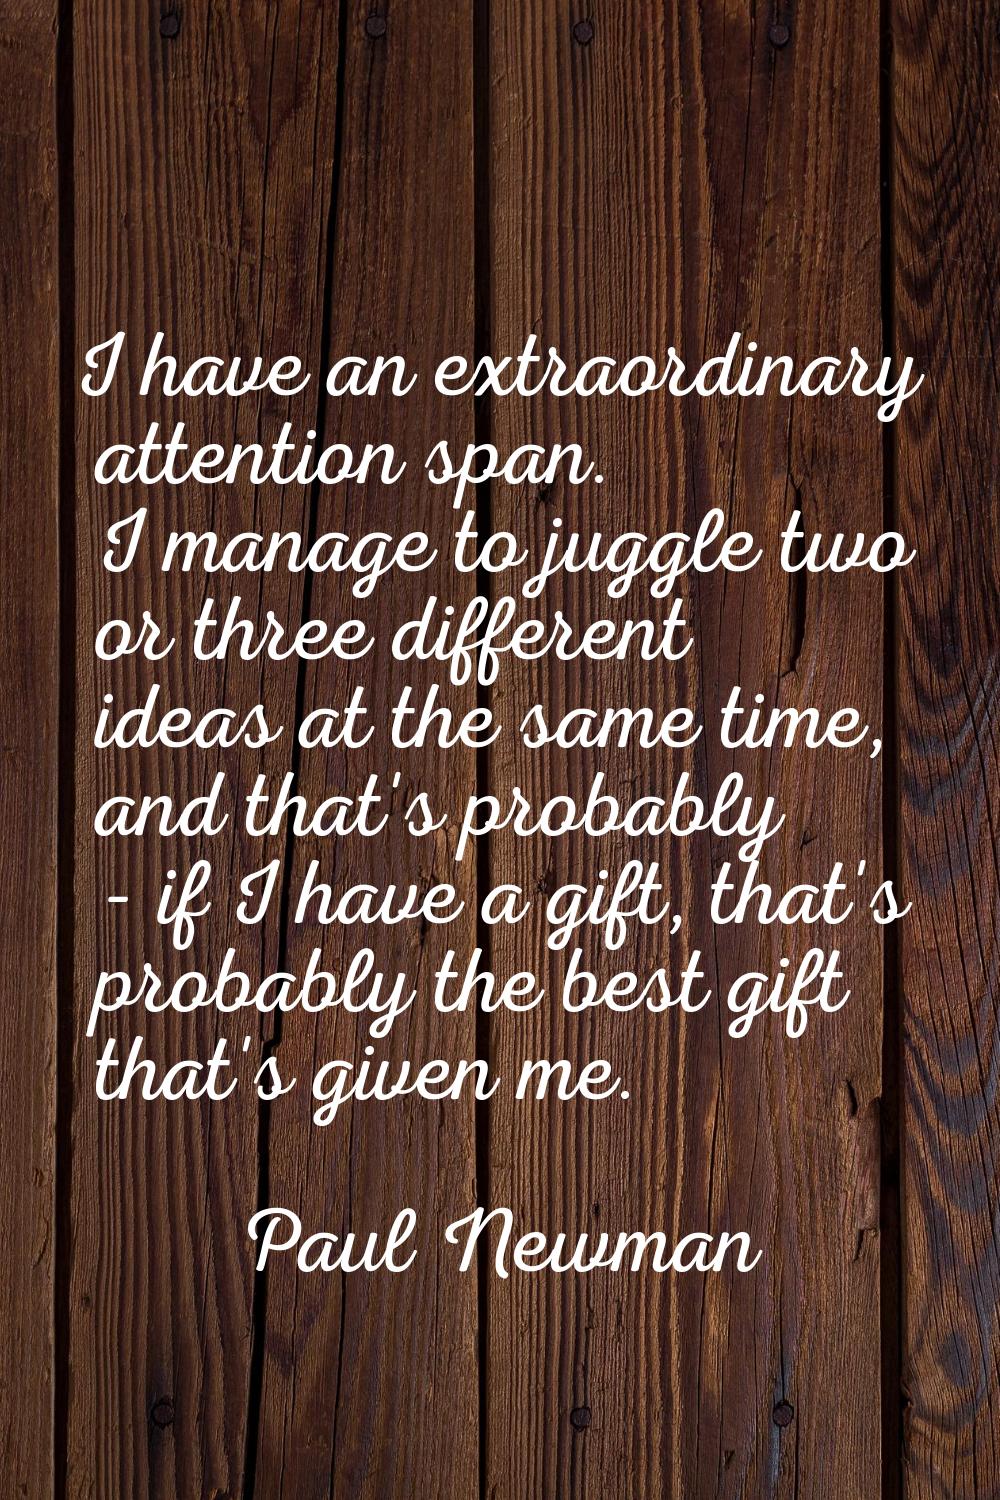 I have an extraordinary attention span. I manage to juggle two or three different ideas at the same